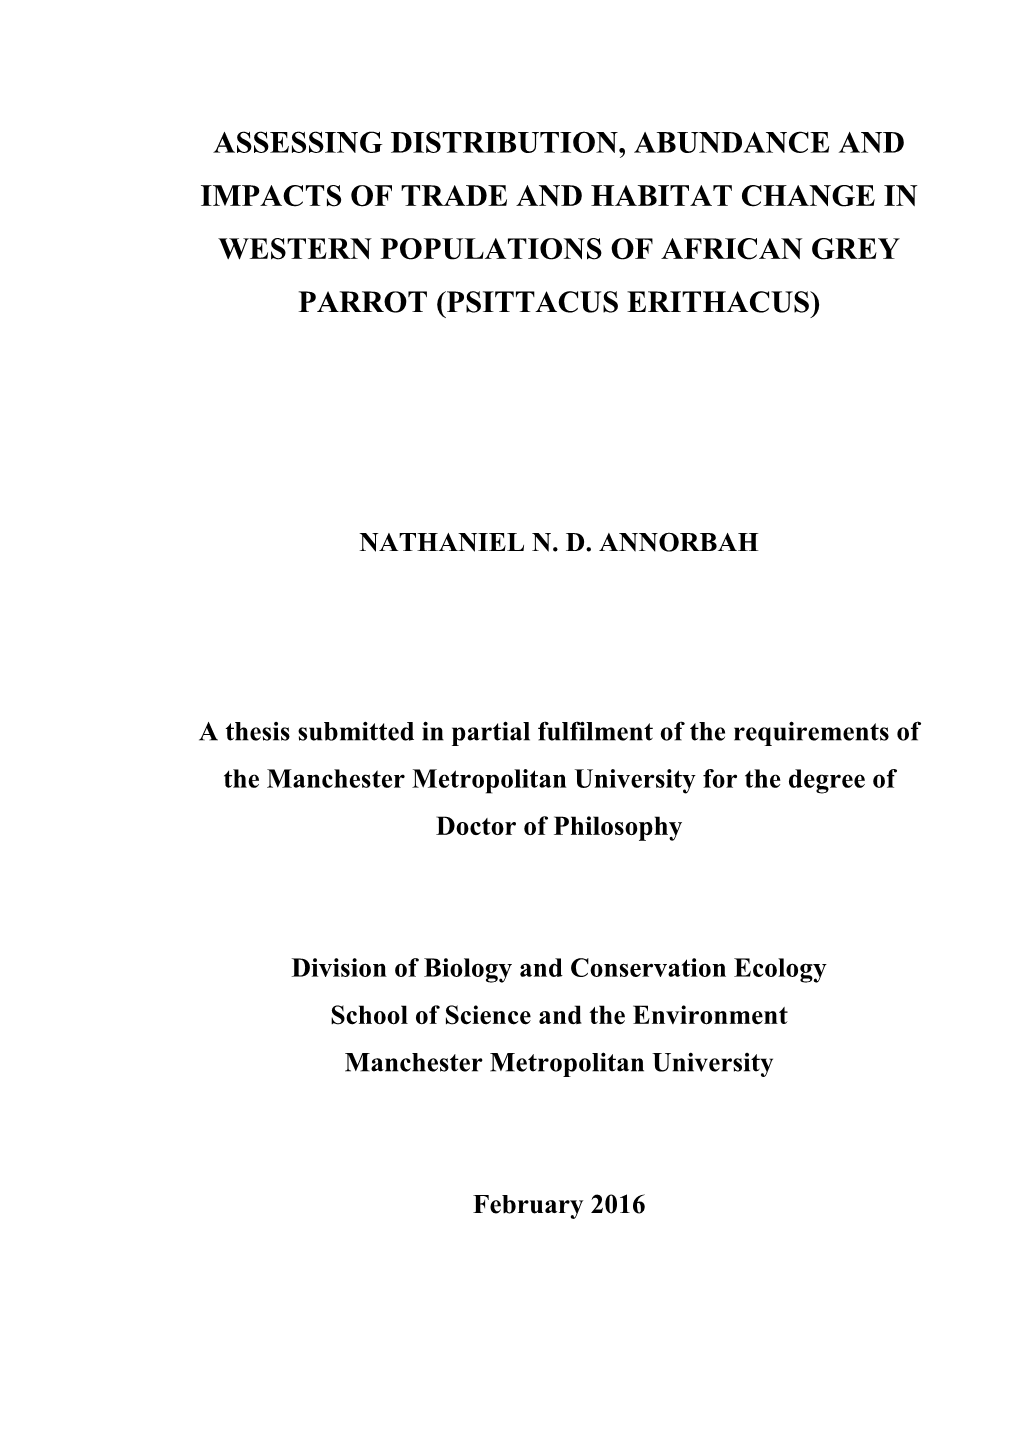 Assessing Distribution, Abundance and Impacts of Trade and Habitat Change in Western Populations of African Grey Parrot (Psittacus Erithacus)